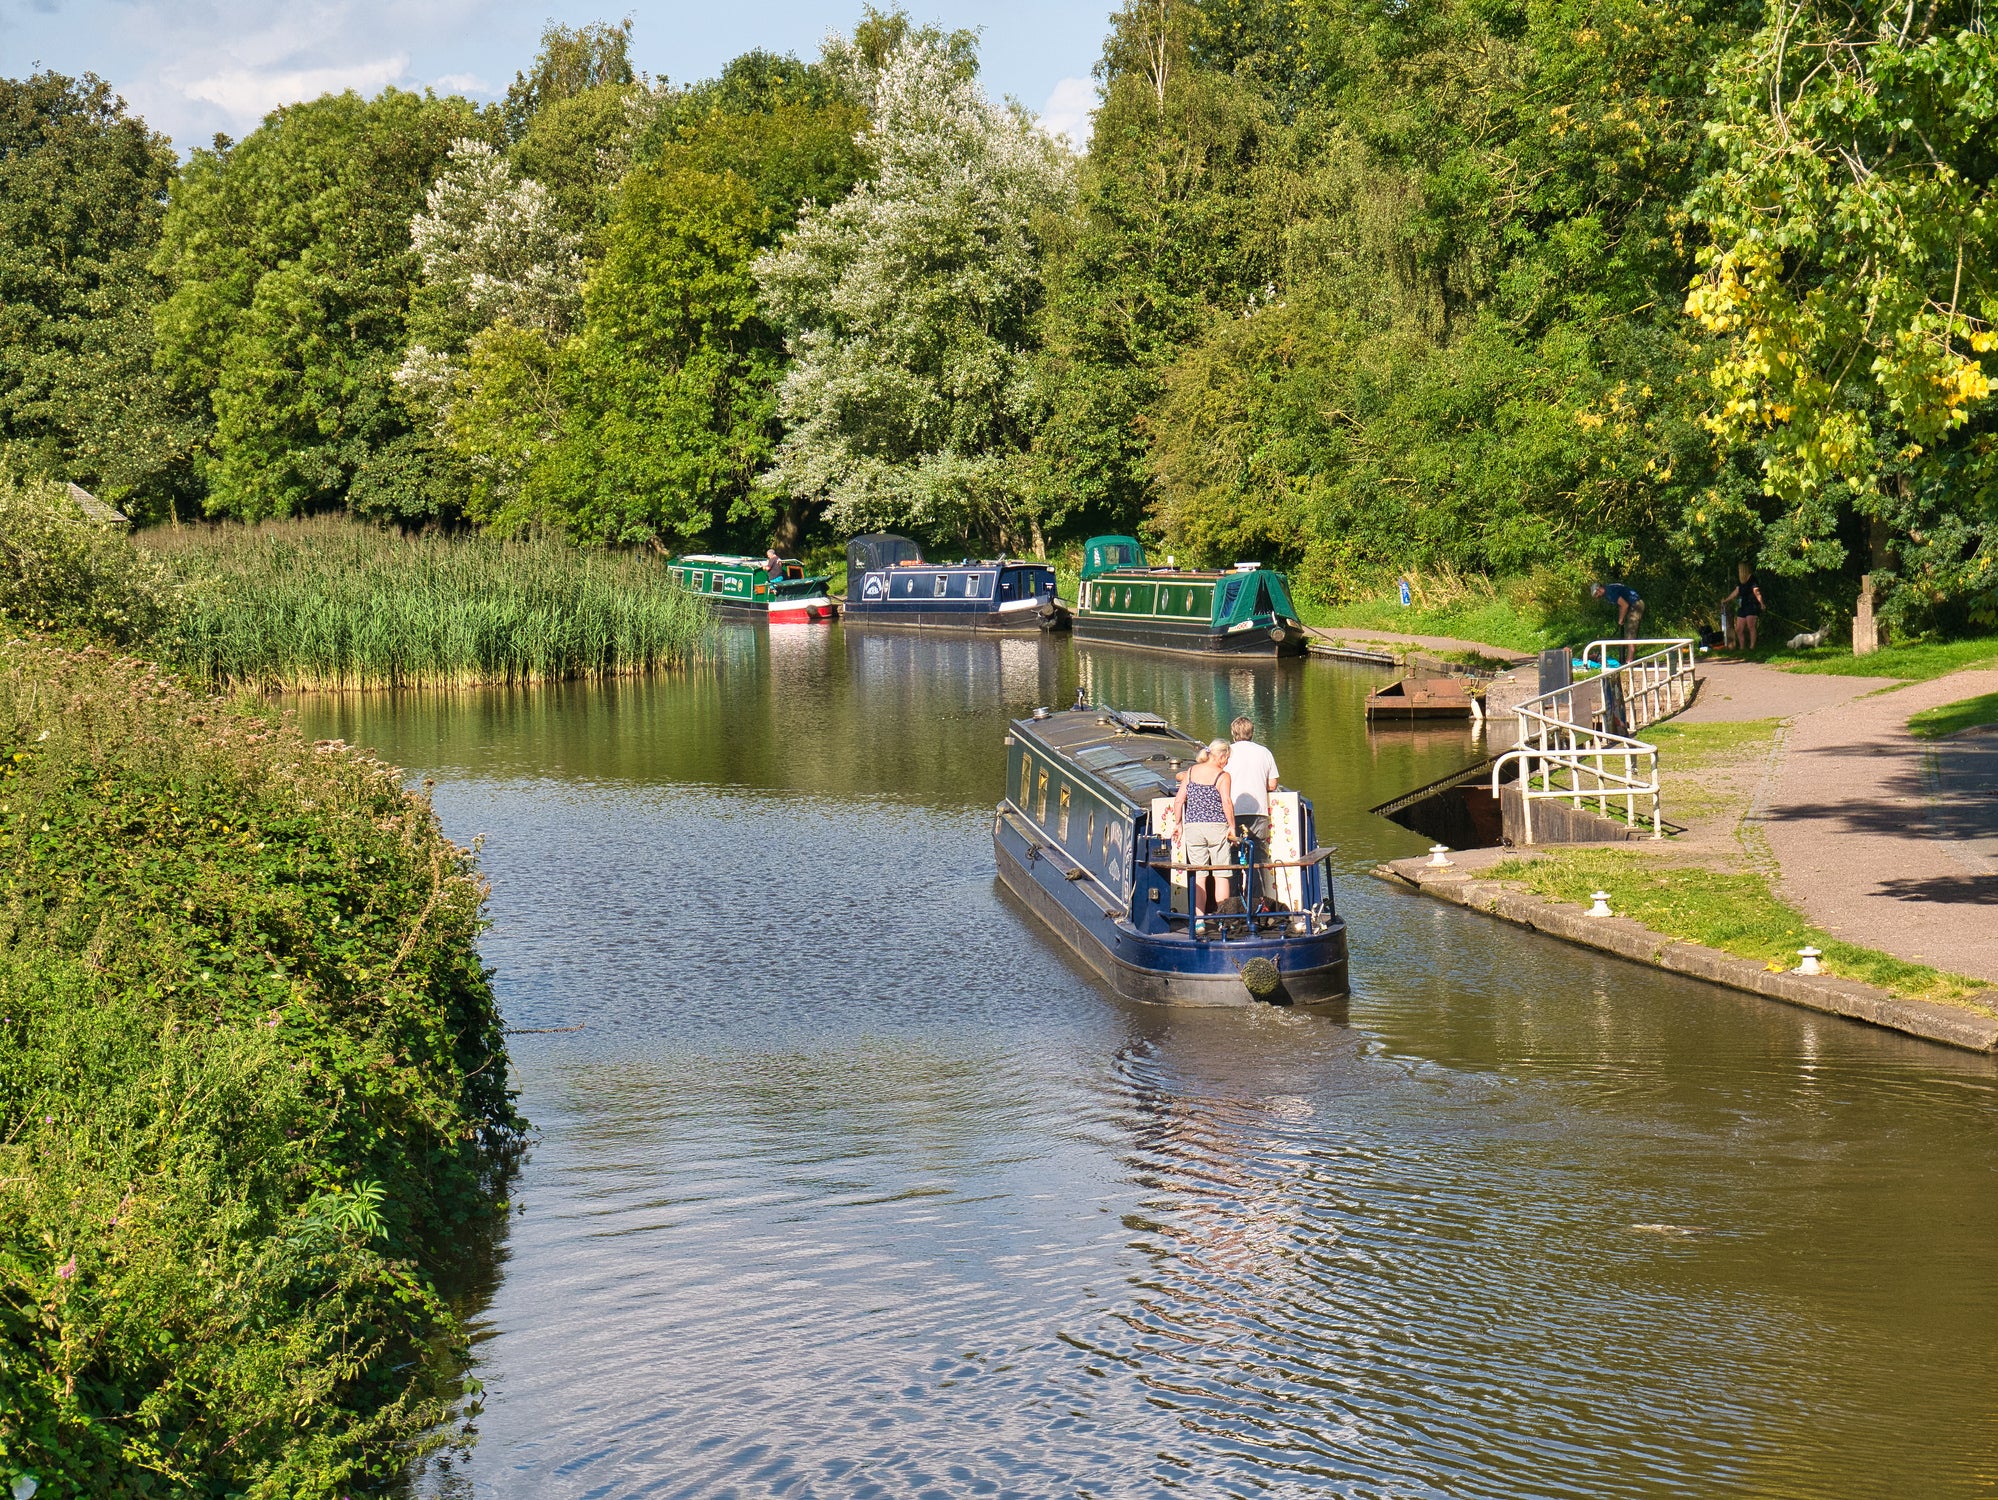 A narrowboat break is a leisurely way to explore the English countryside